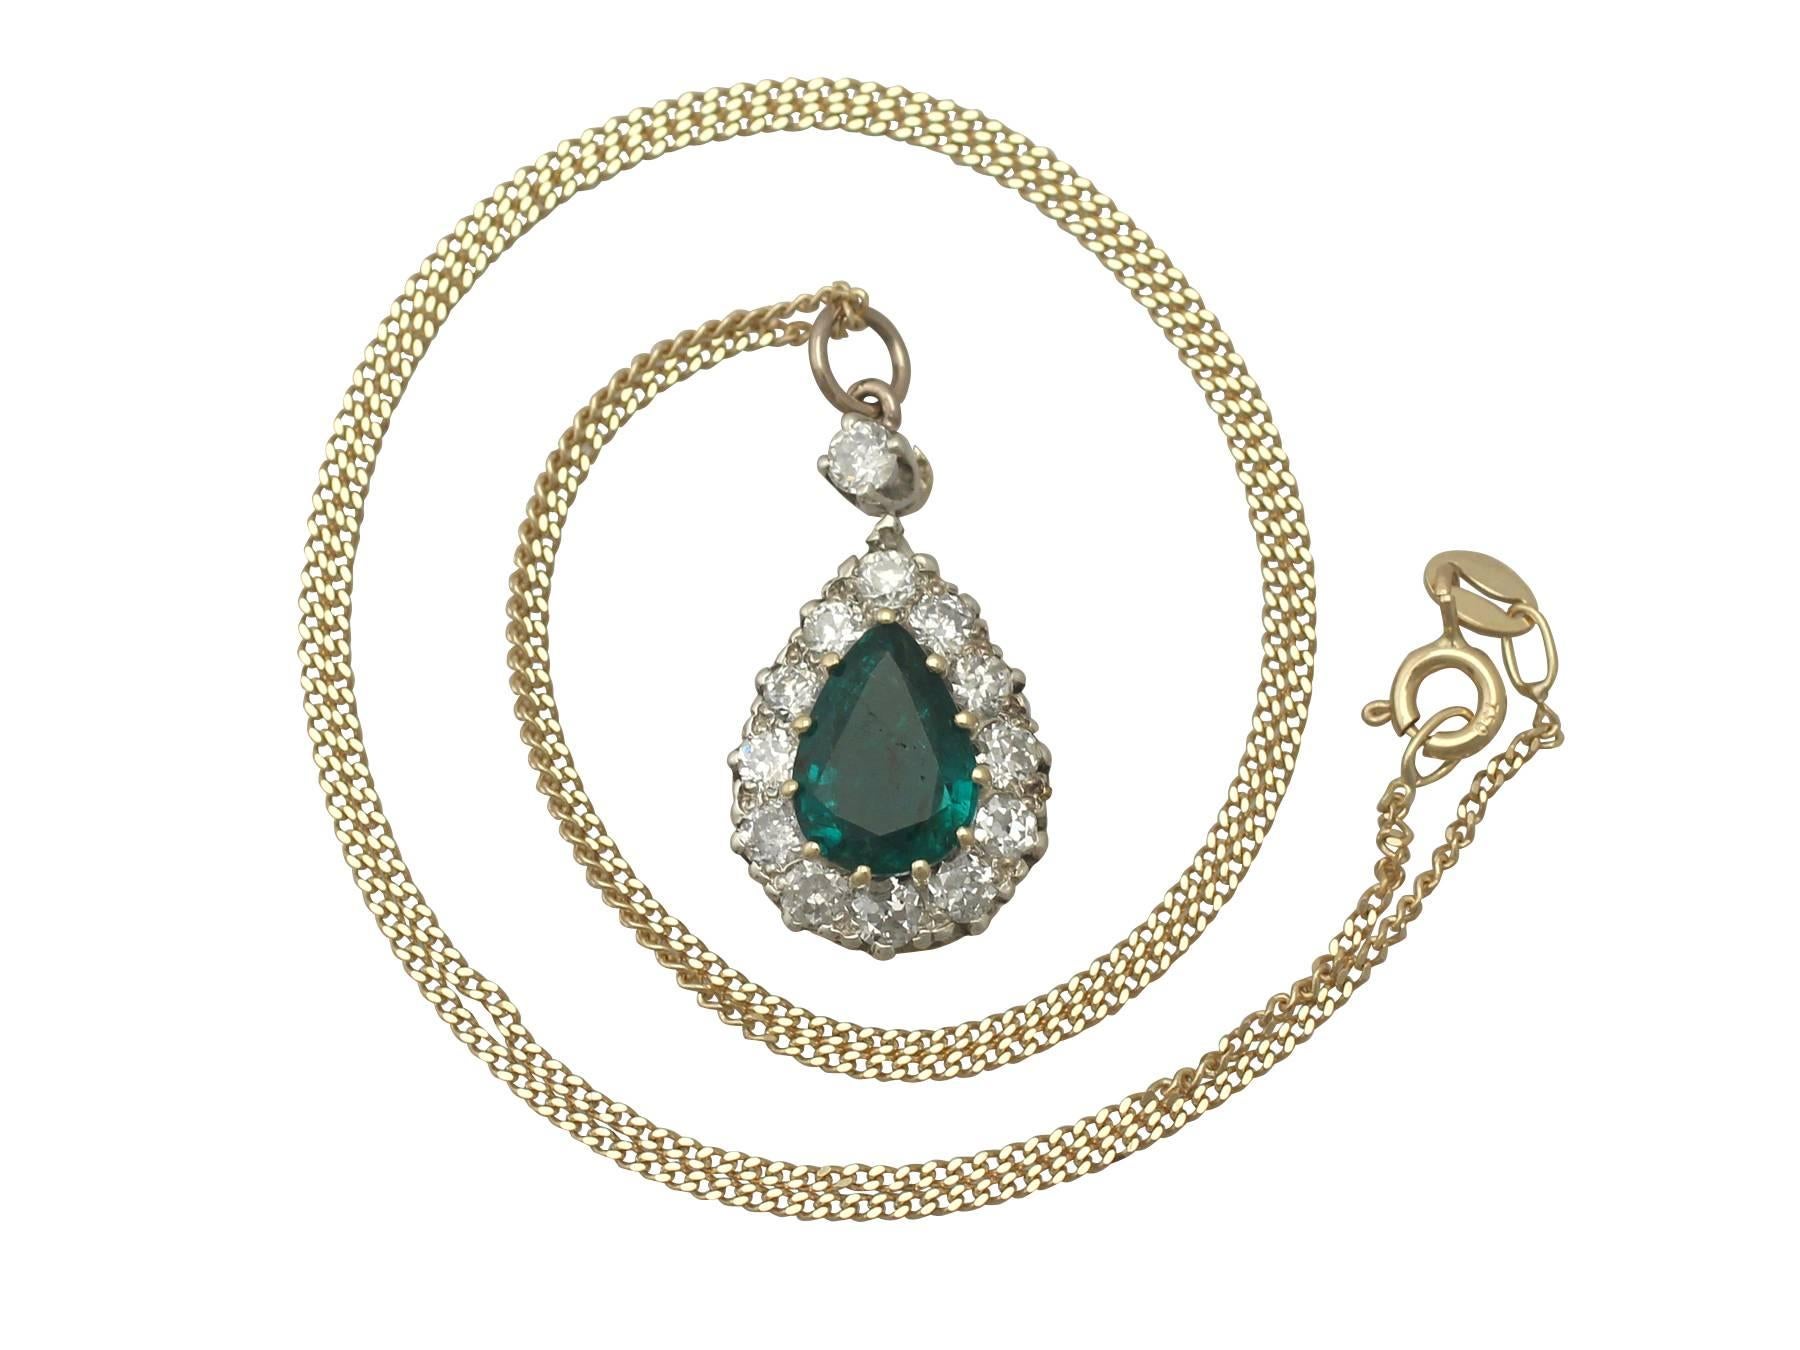 A stunning 2.09 carat emerald and 1.35 carat diamond, 9 carat yellow gold and silver set pendant; part of our diverse antique jewellery and estate jewelry collections.

This stunning, fine and impressive diamond and emerald pendant has been